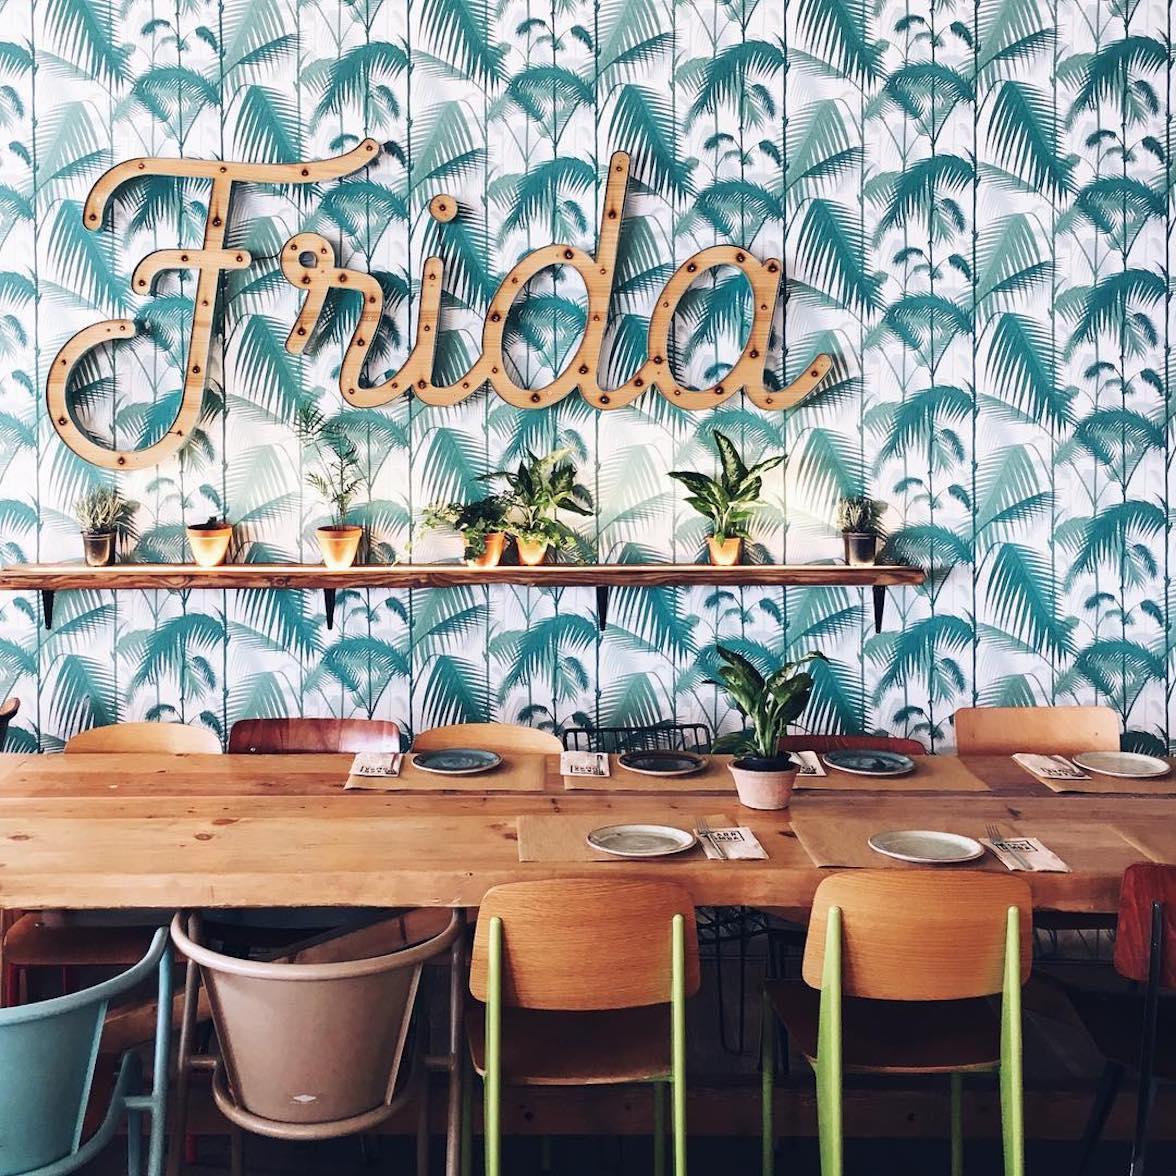 25 Restaurants & Hotels With The Most Beautiful Wallpaper